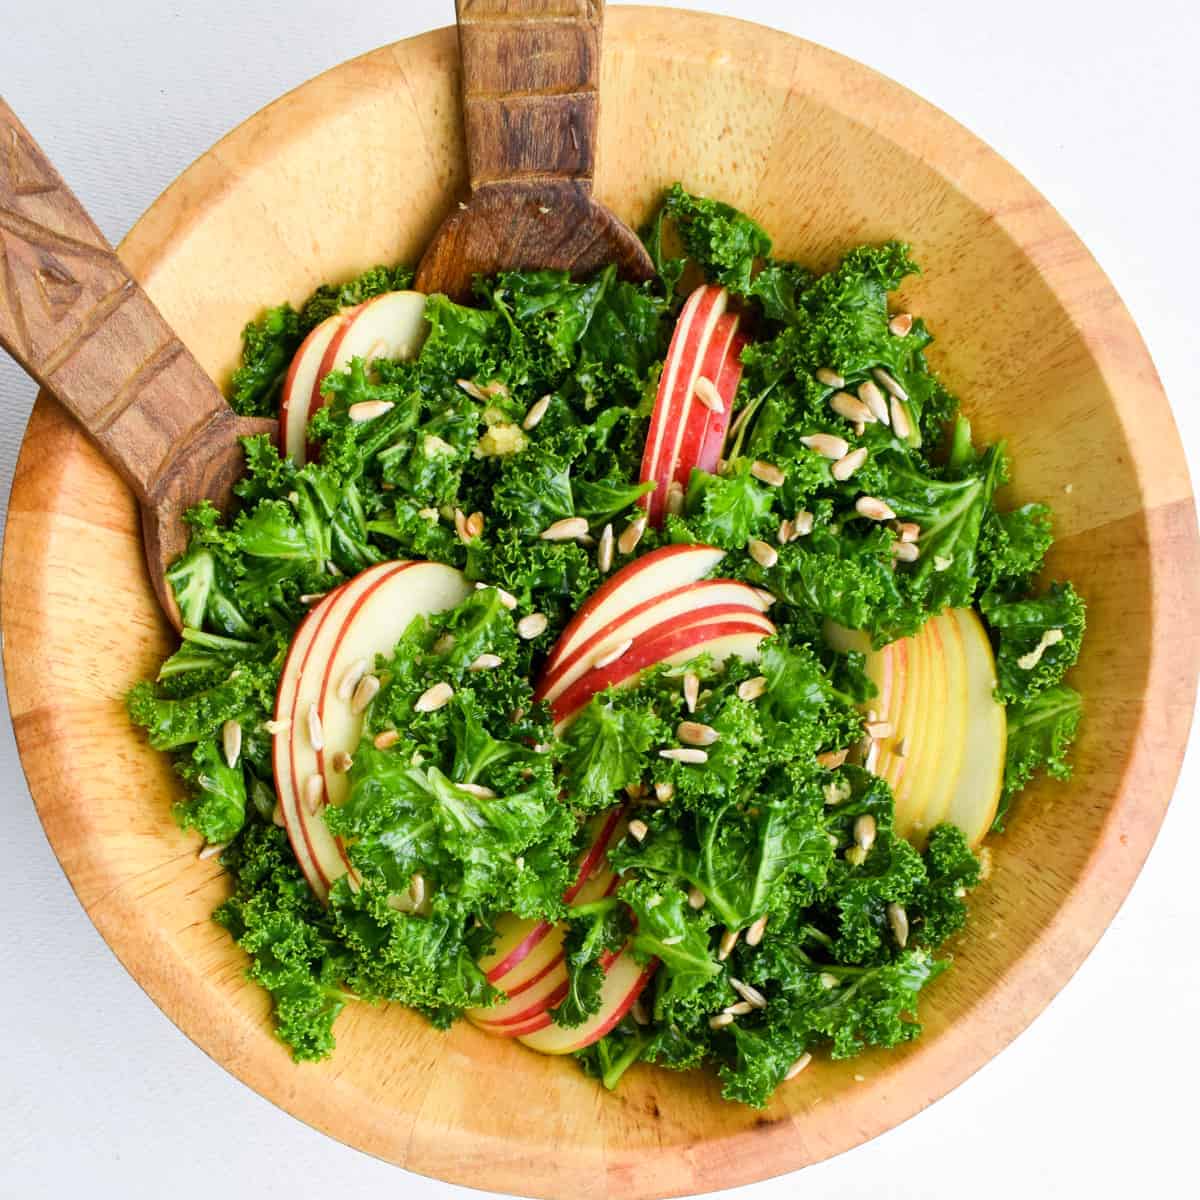 Overhead view of a wooden bowl with kale salad topped with sunflower seeds and sliced apples.